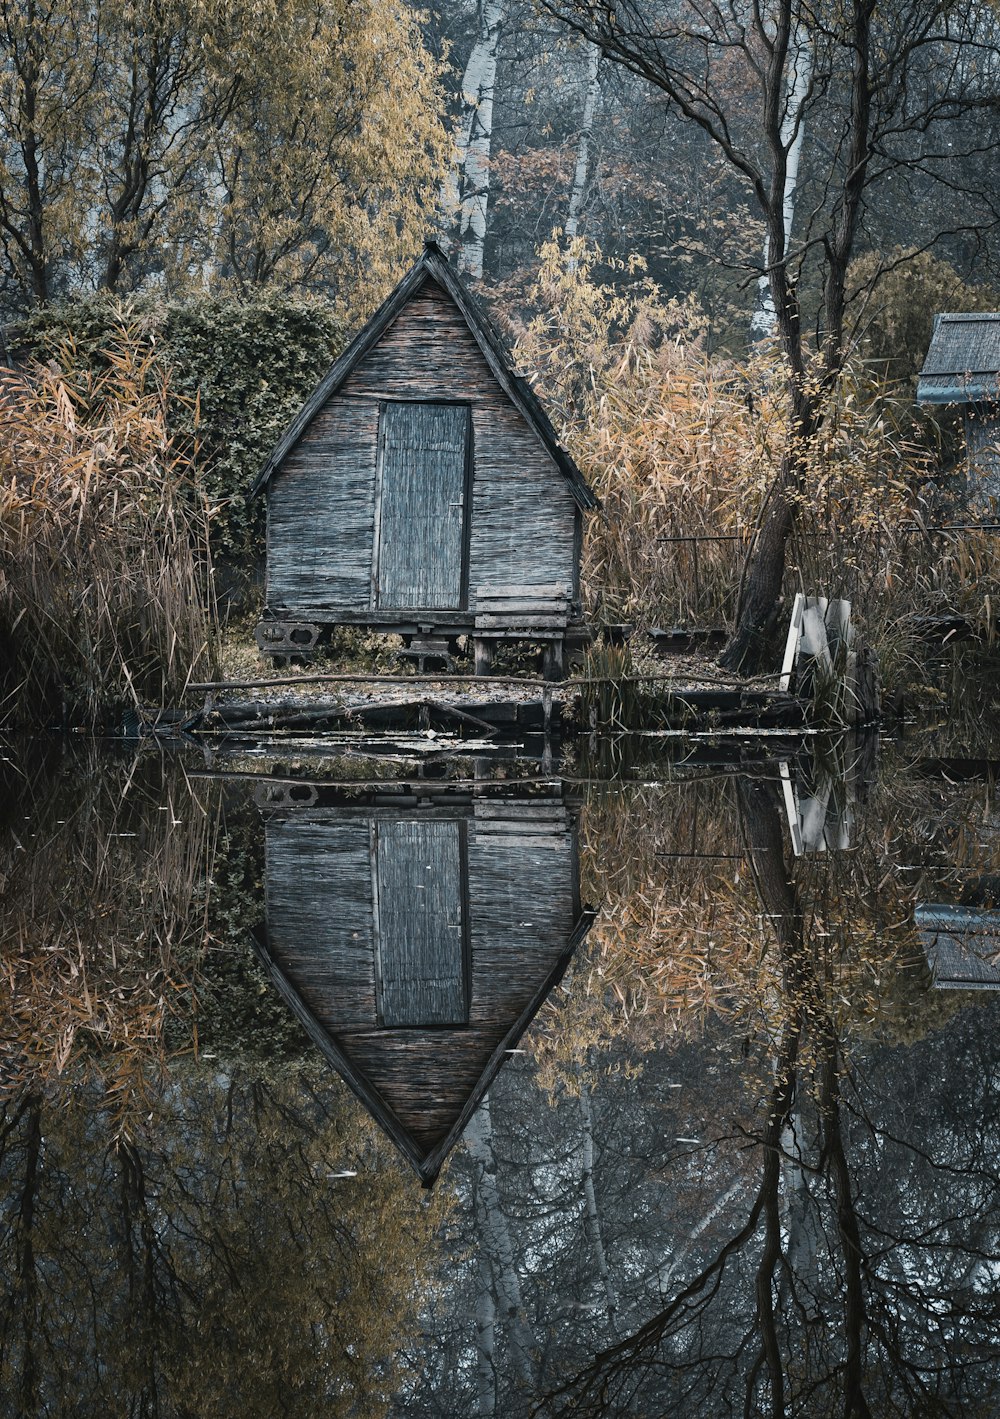 a small cabin sitting in the middle of a forest next to a body of water